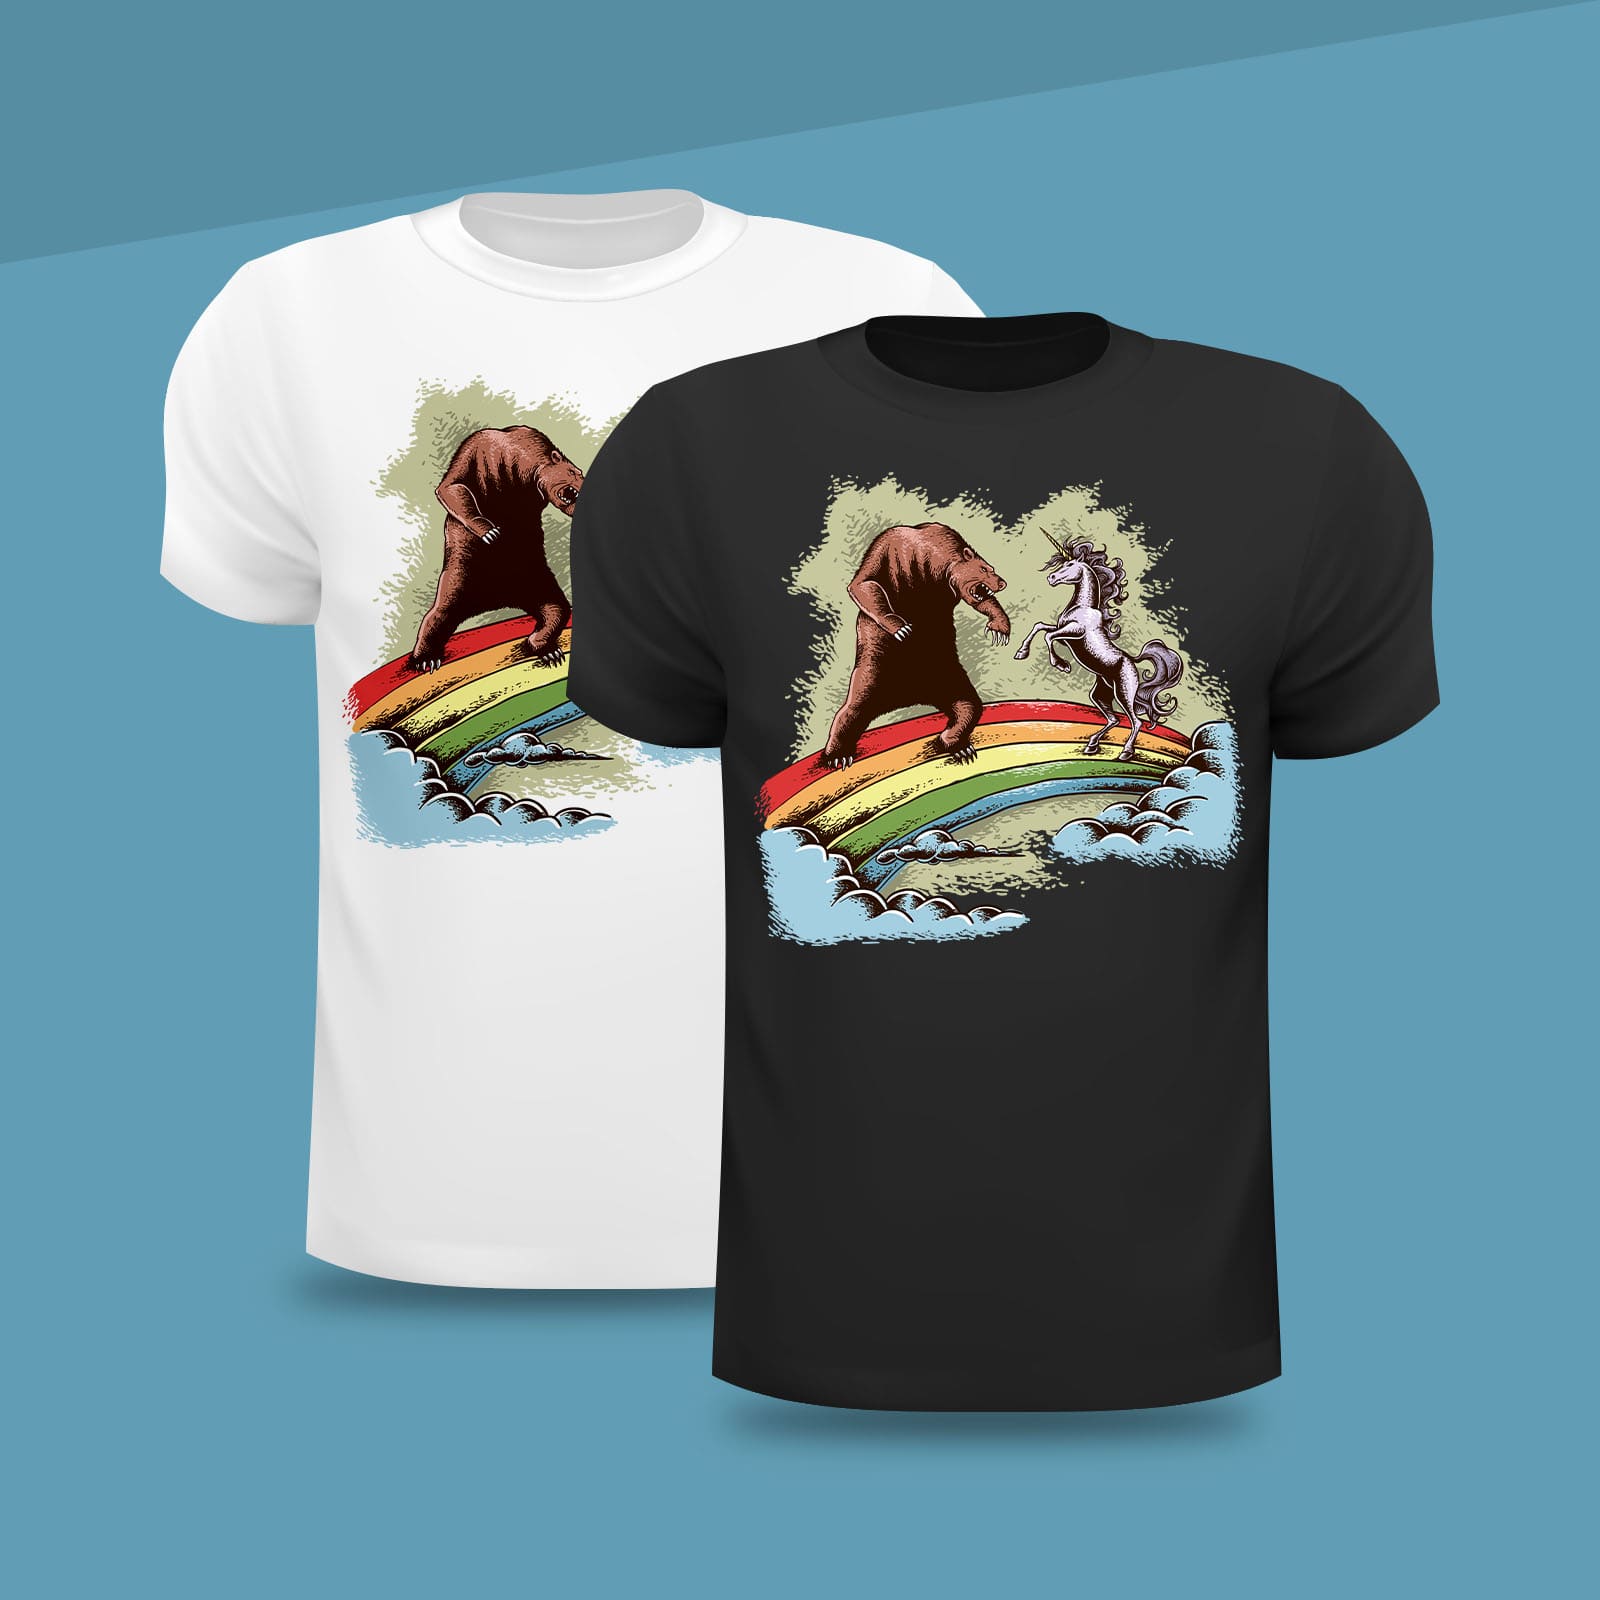 graphic-t-shirt-design-with-background-by-Flocksy